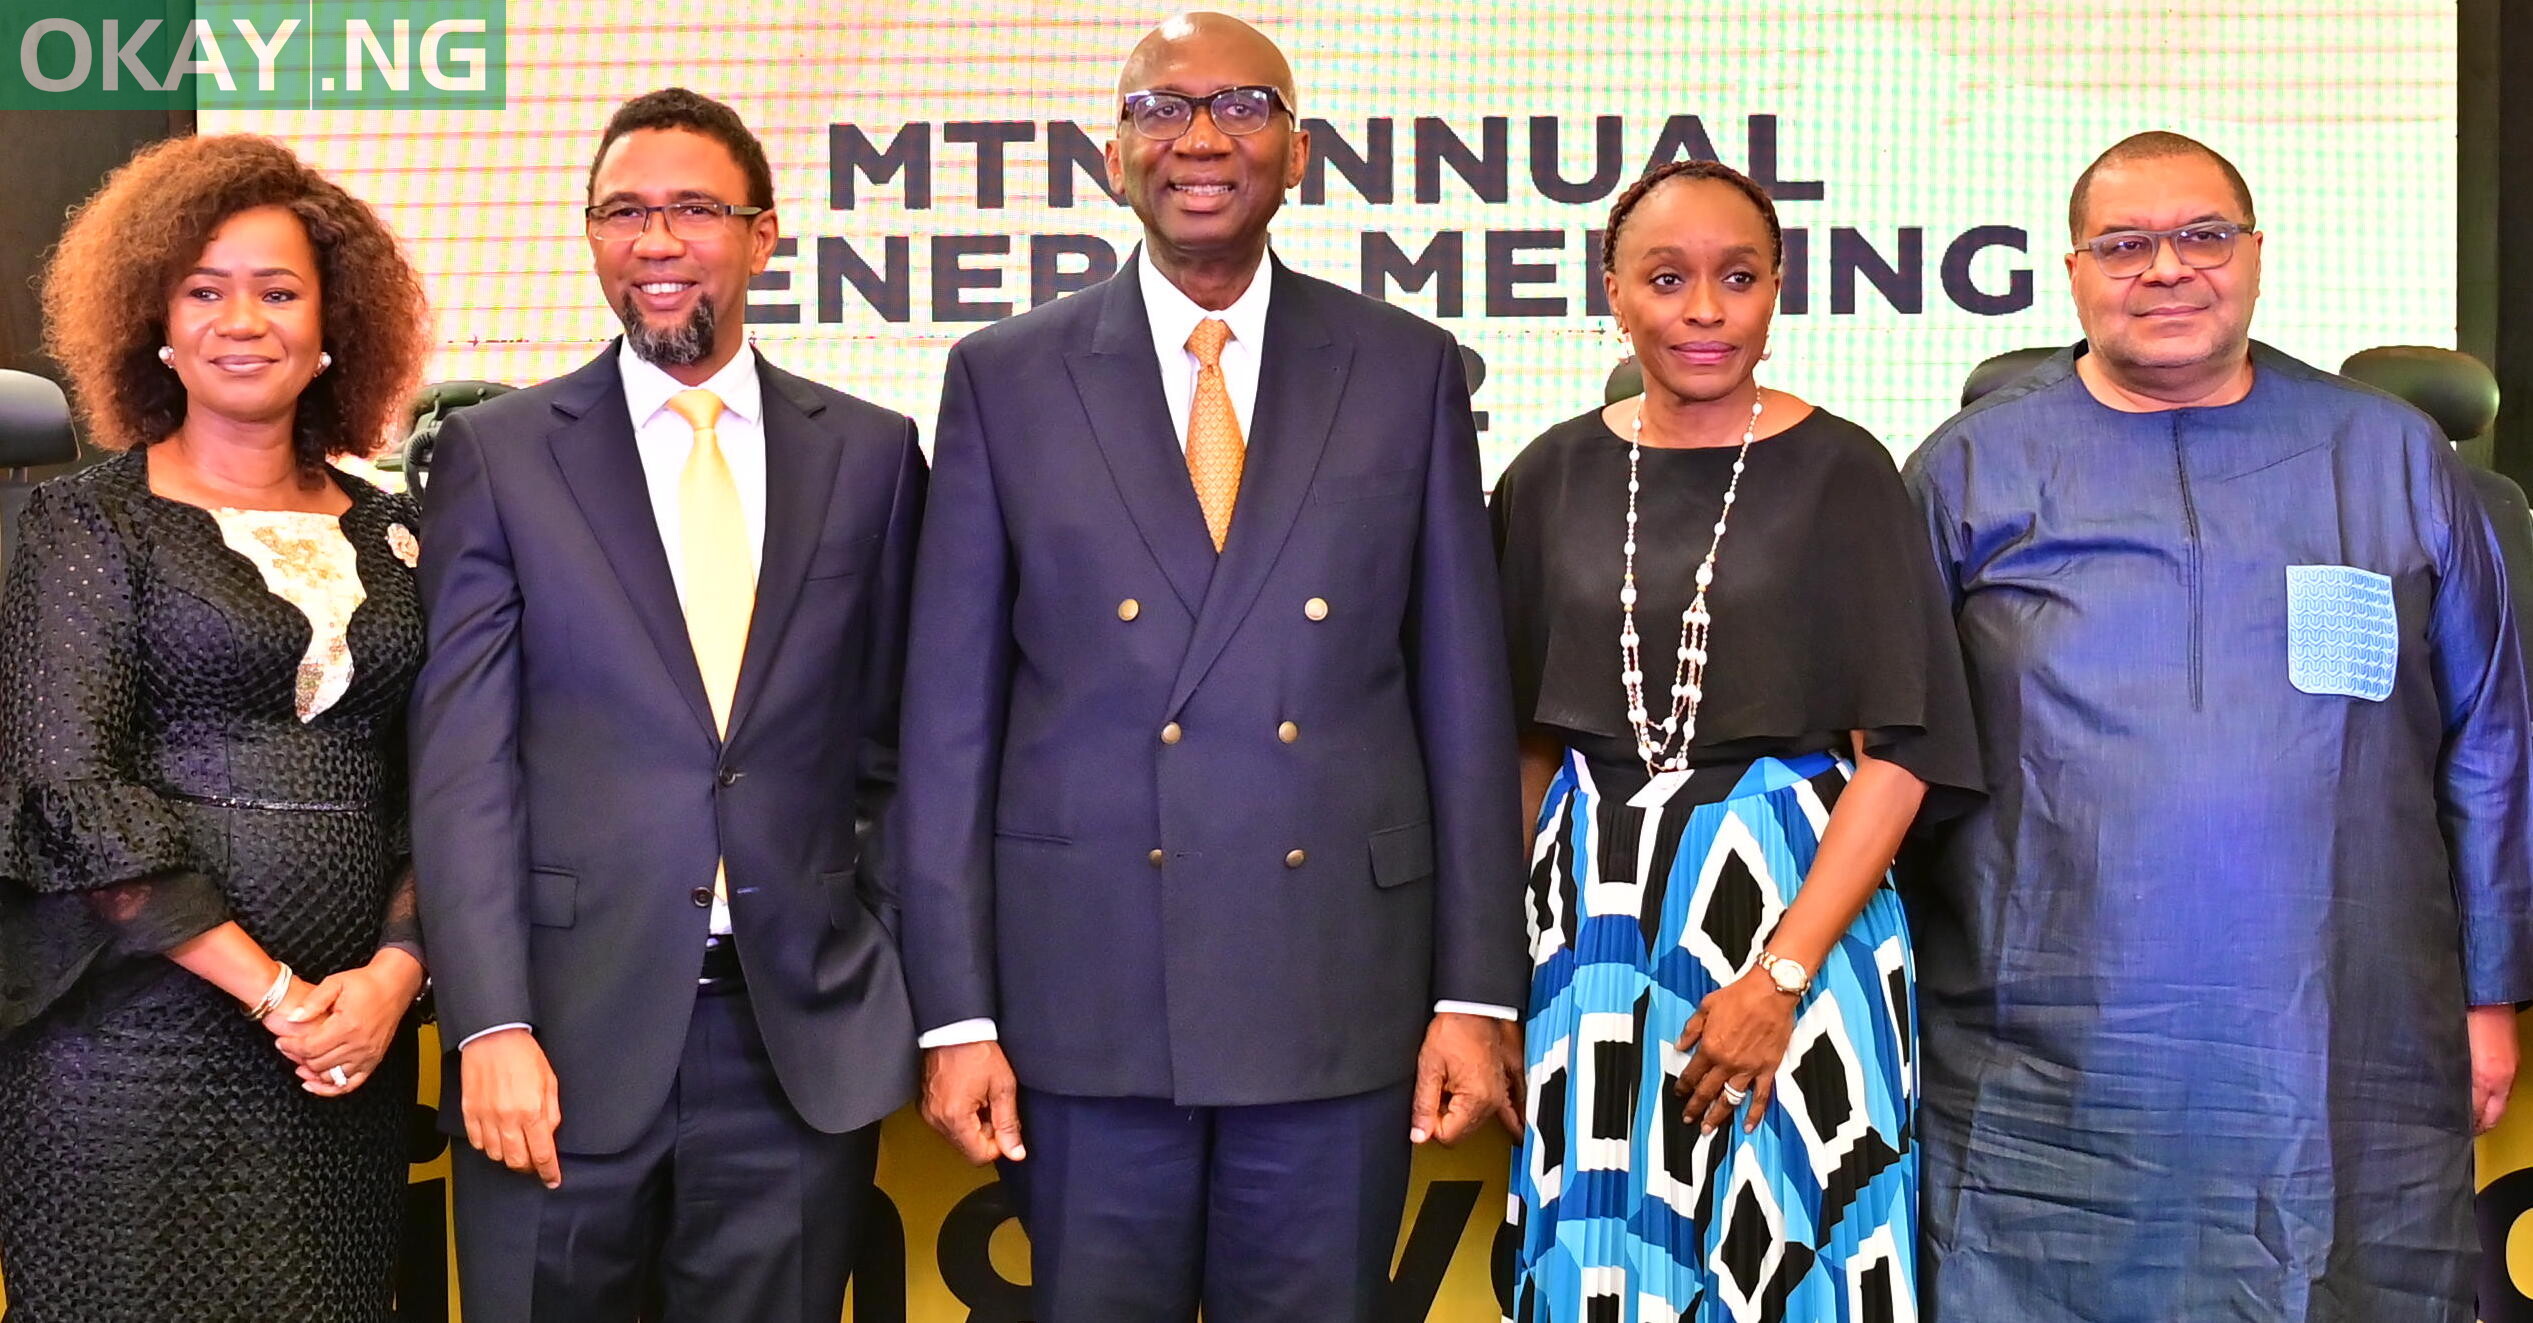 L-R: Company Secretary, MTN Nigeria Communications Plc, Uto Ukpanah; Chief Executive Officer, MTN Nigeria Communications Plc, Karl Olutokun Toriola; Chairman, MTN Nigeria Communications Plc, Dr. Ernest Ndukwe, OFR; Non-Executive Director, MTN Nigeria Communications Plc, Dr. Omobola Johnson, and Non-Executive Director, MTN Nigeria Communications Plc, Andrew Alli at the third Annual General Meeting, held at the MTN Nigeria Headquarters on Thursday, April 28, 2022.